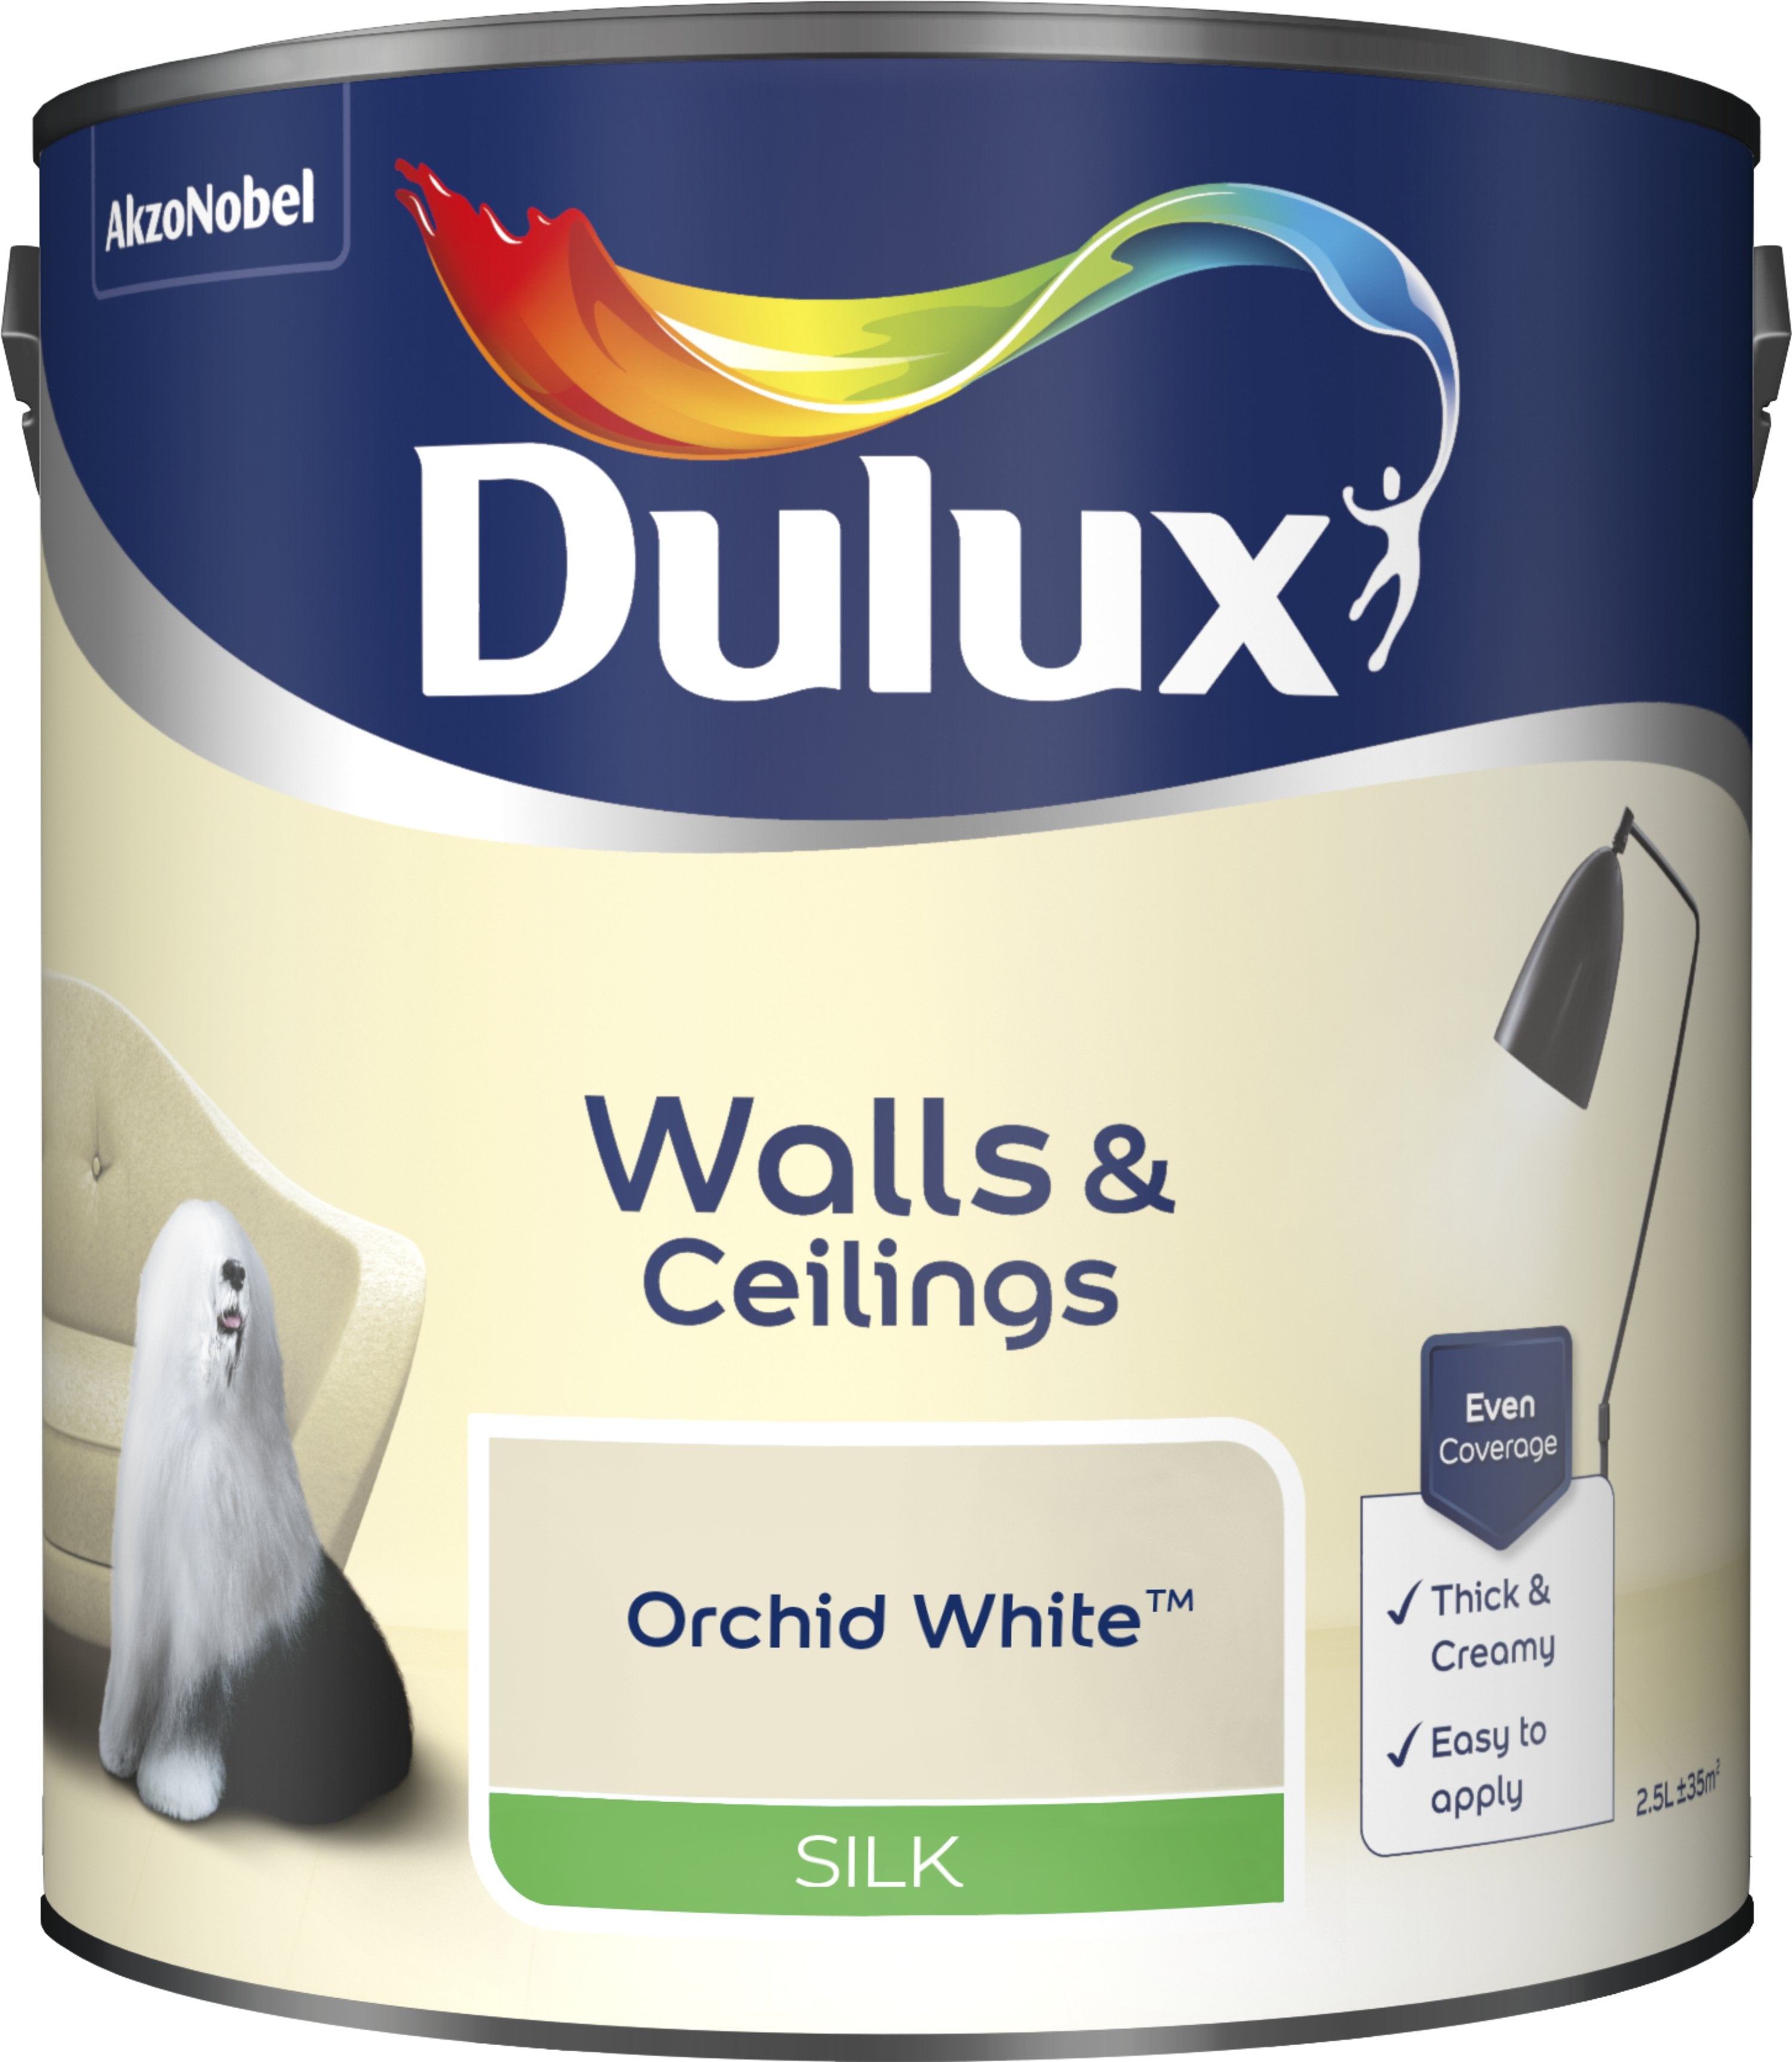 Dulux Silk Emulsion Paint For Walls And Ceilings - Orchid White 2.5L Garden & Diy Home Improvements